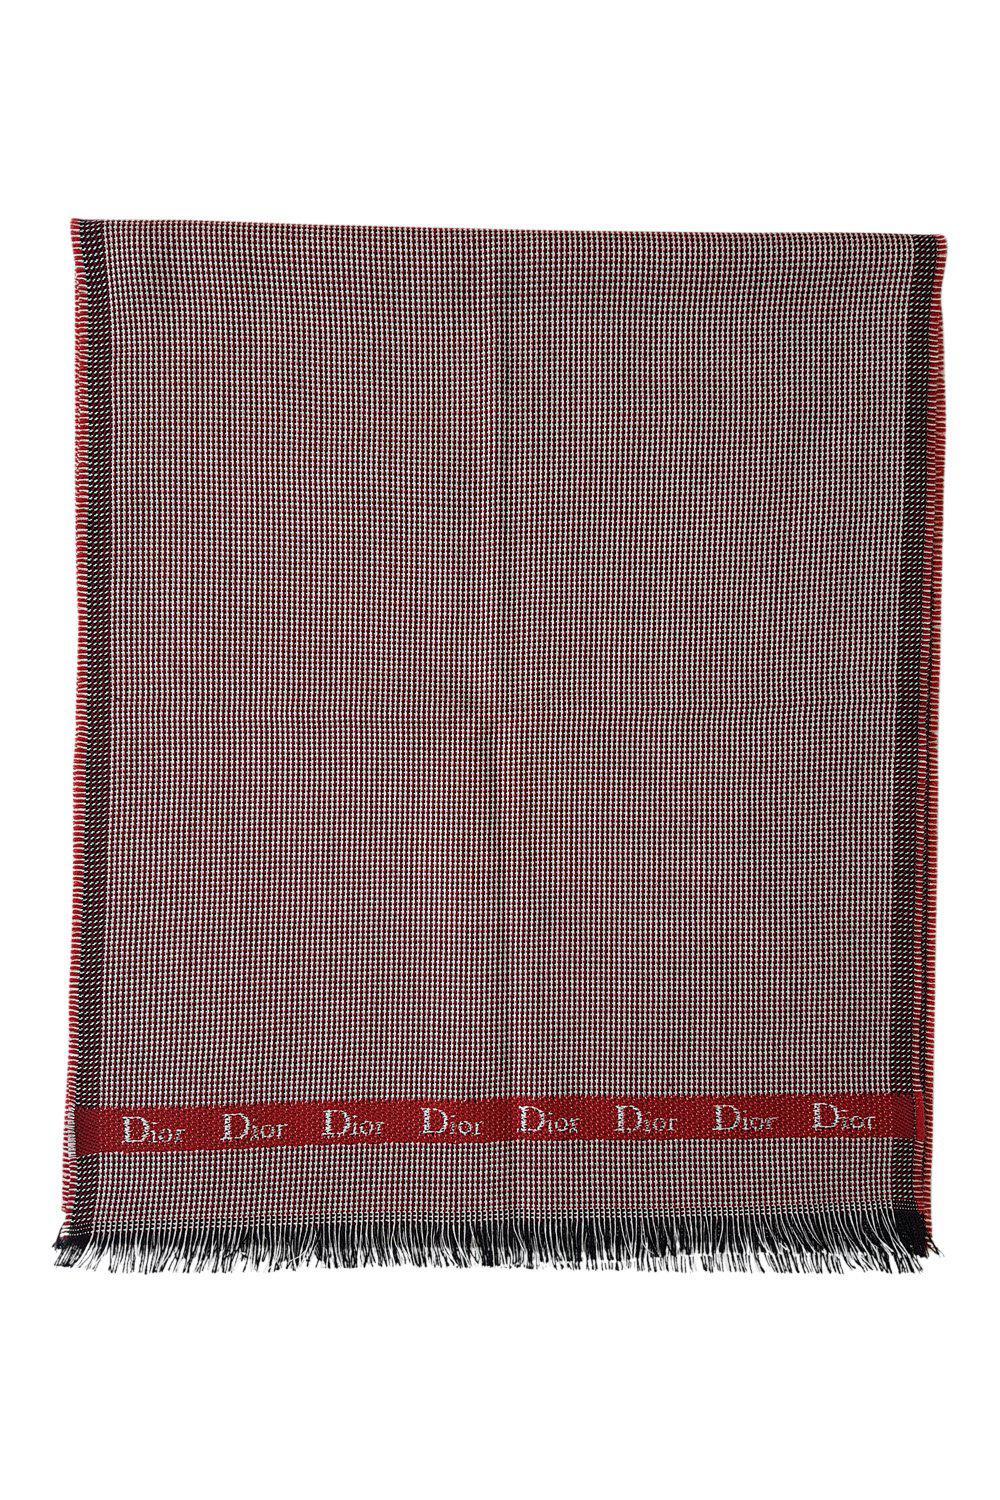 CHRISTIAN DIOR Red White Blue Checked Rectangular Wool Stole 60"x15"-Christian Dior-The Freperie